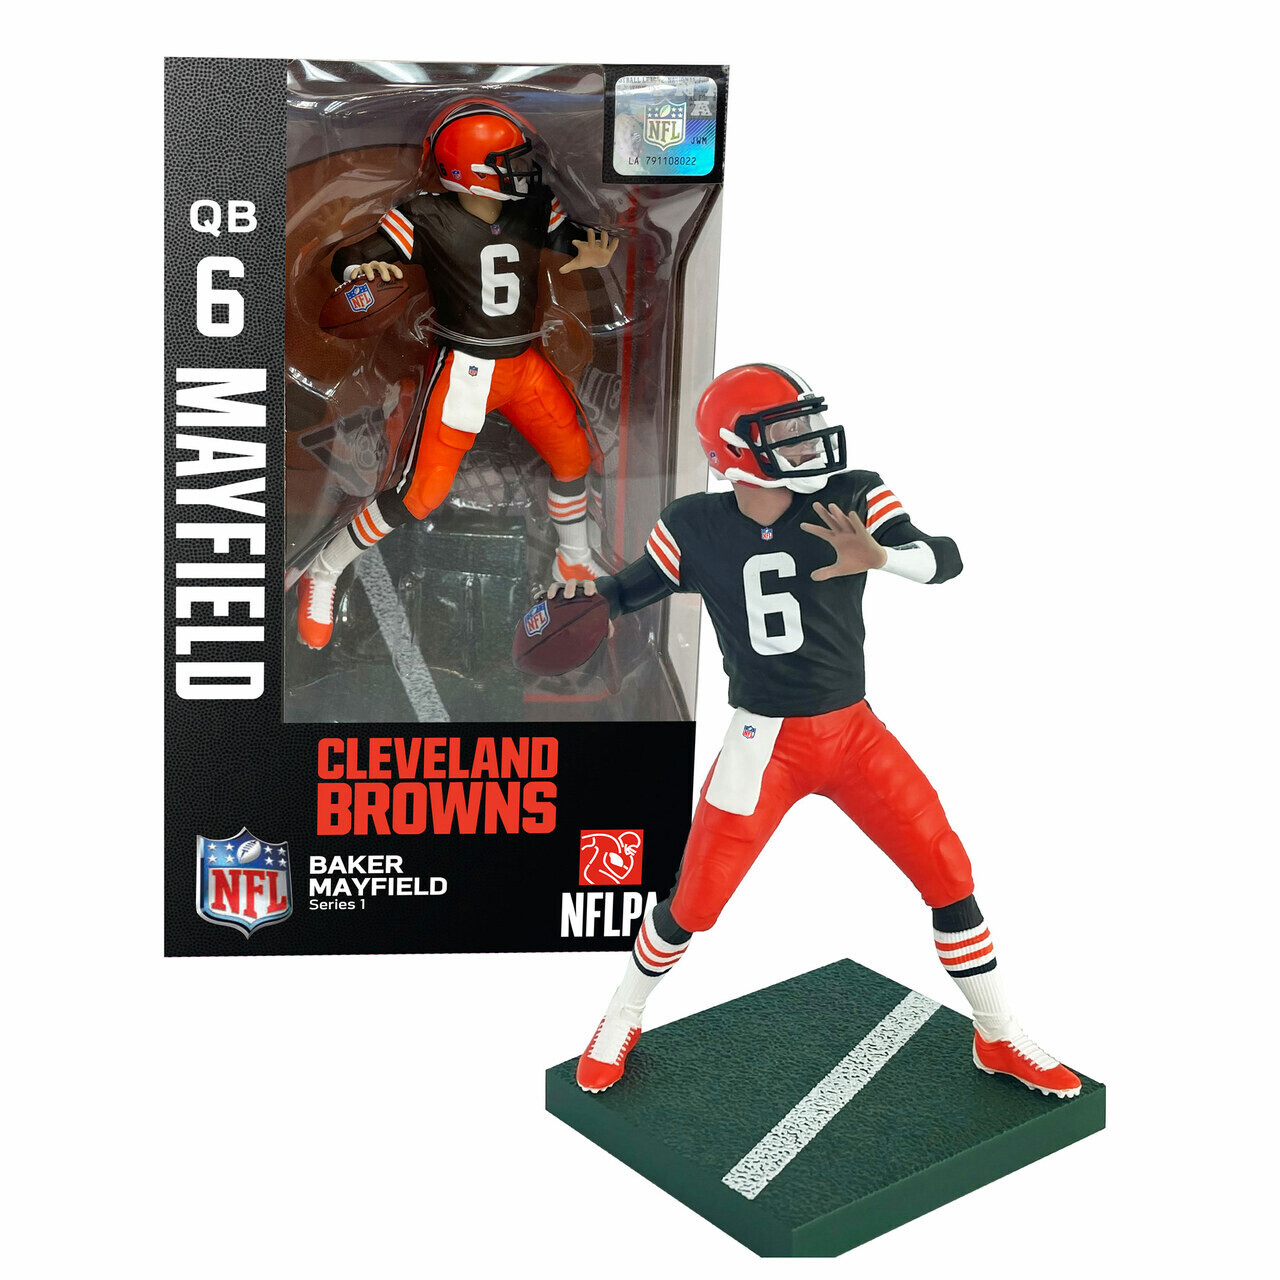 Cleveland Browns - Baker Mayfield Series 1